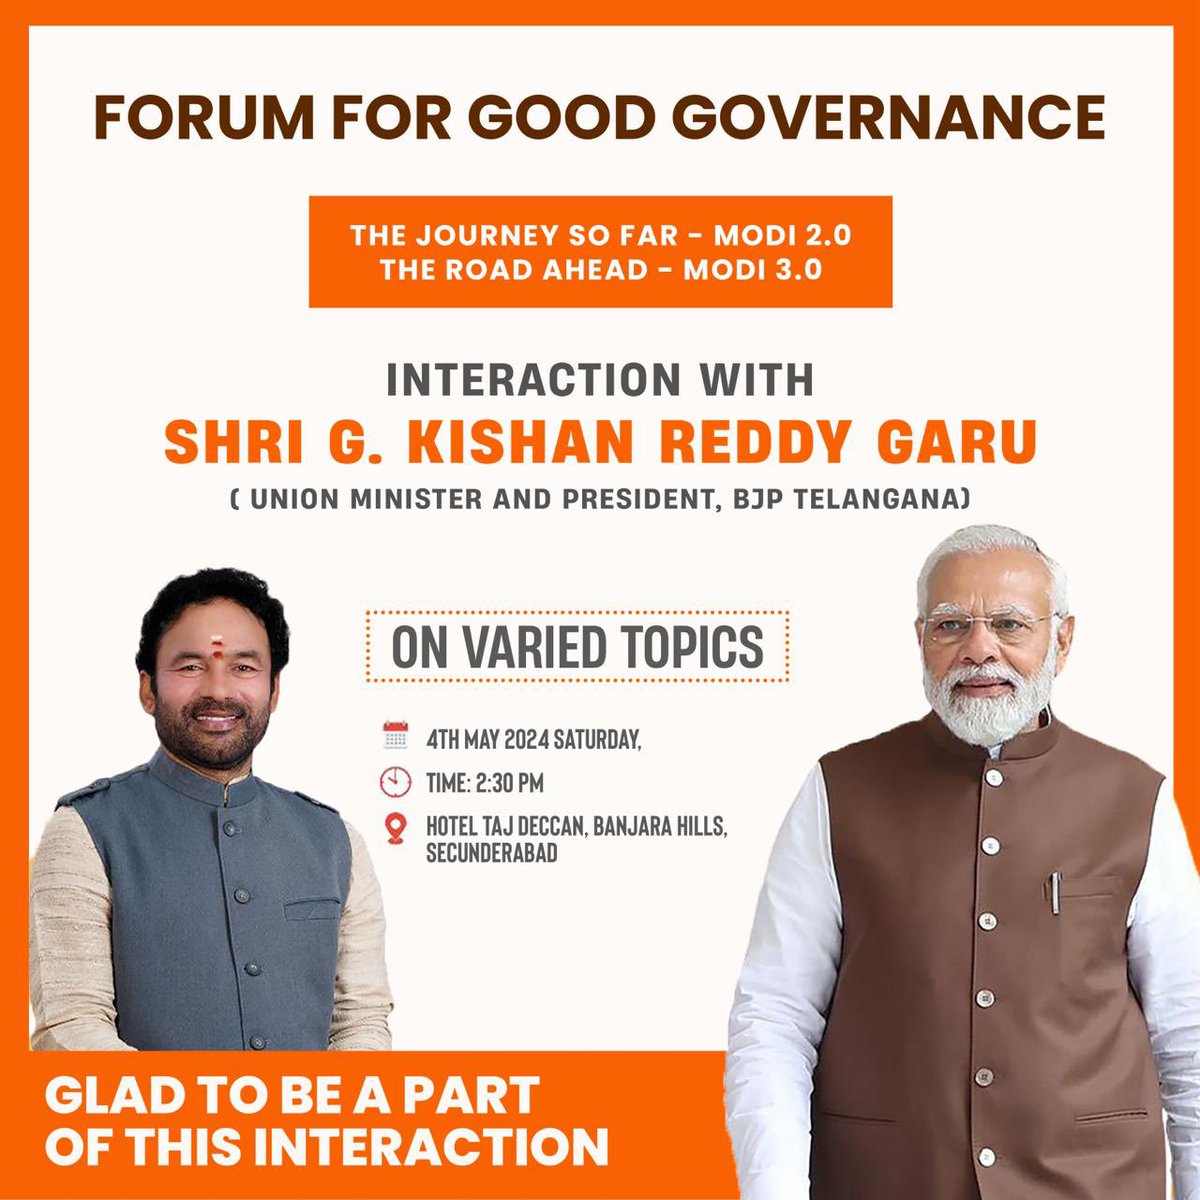 Union Minister and Telangana BJP President Shri G Kishan will interact with leading social media influencers and professionals on varied topics organised by *Forum For Good Governance* The Journey so far – Modi 2.0 The Road Ahead…